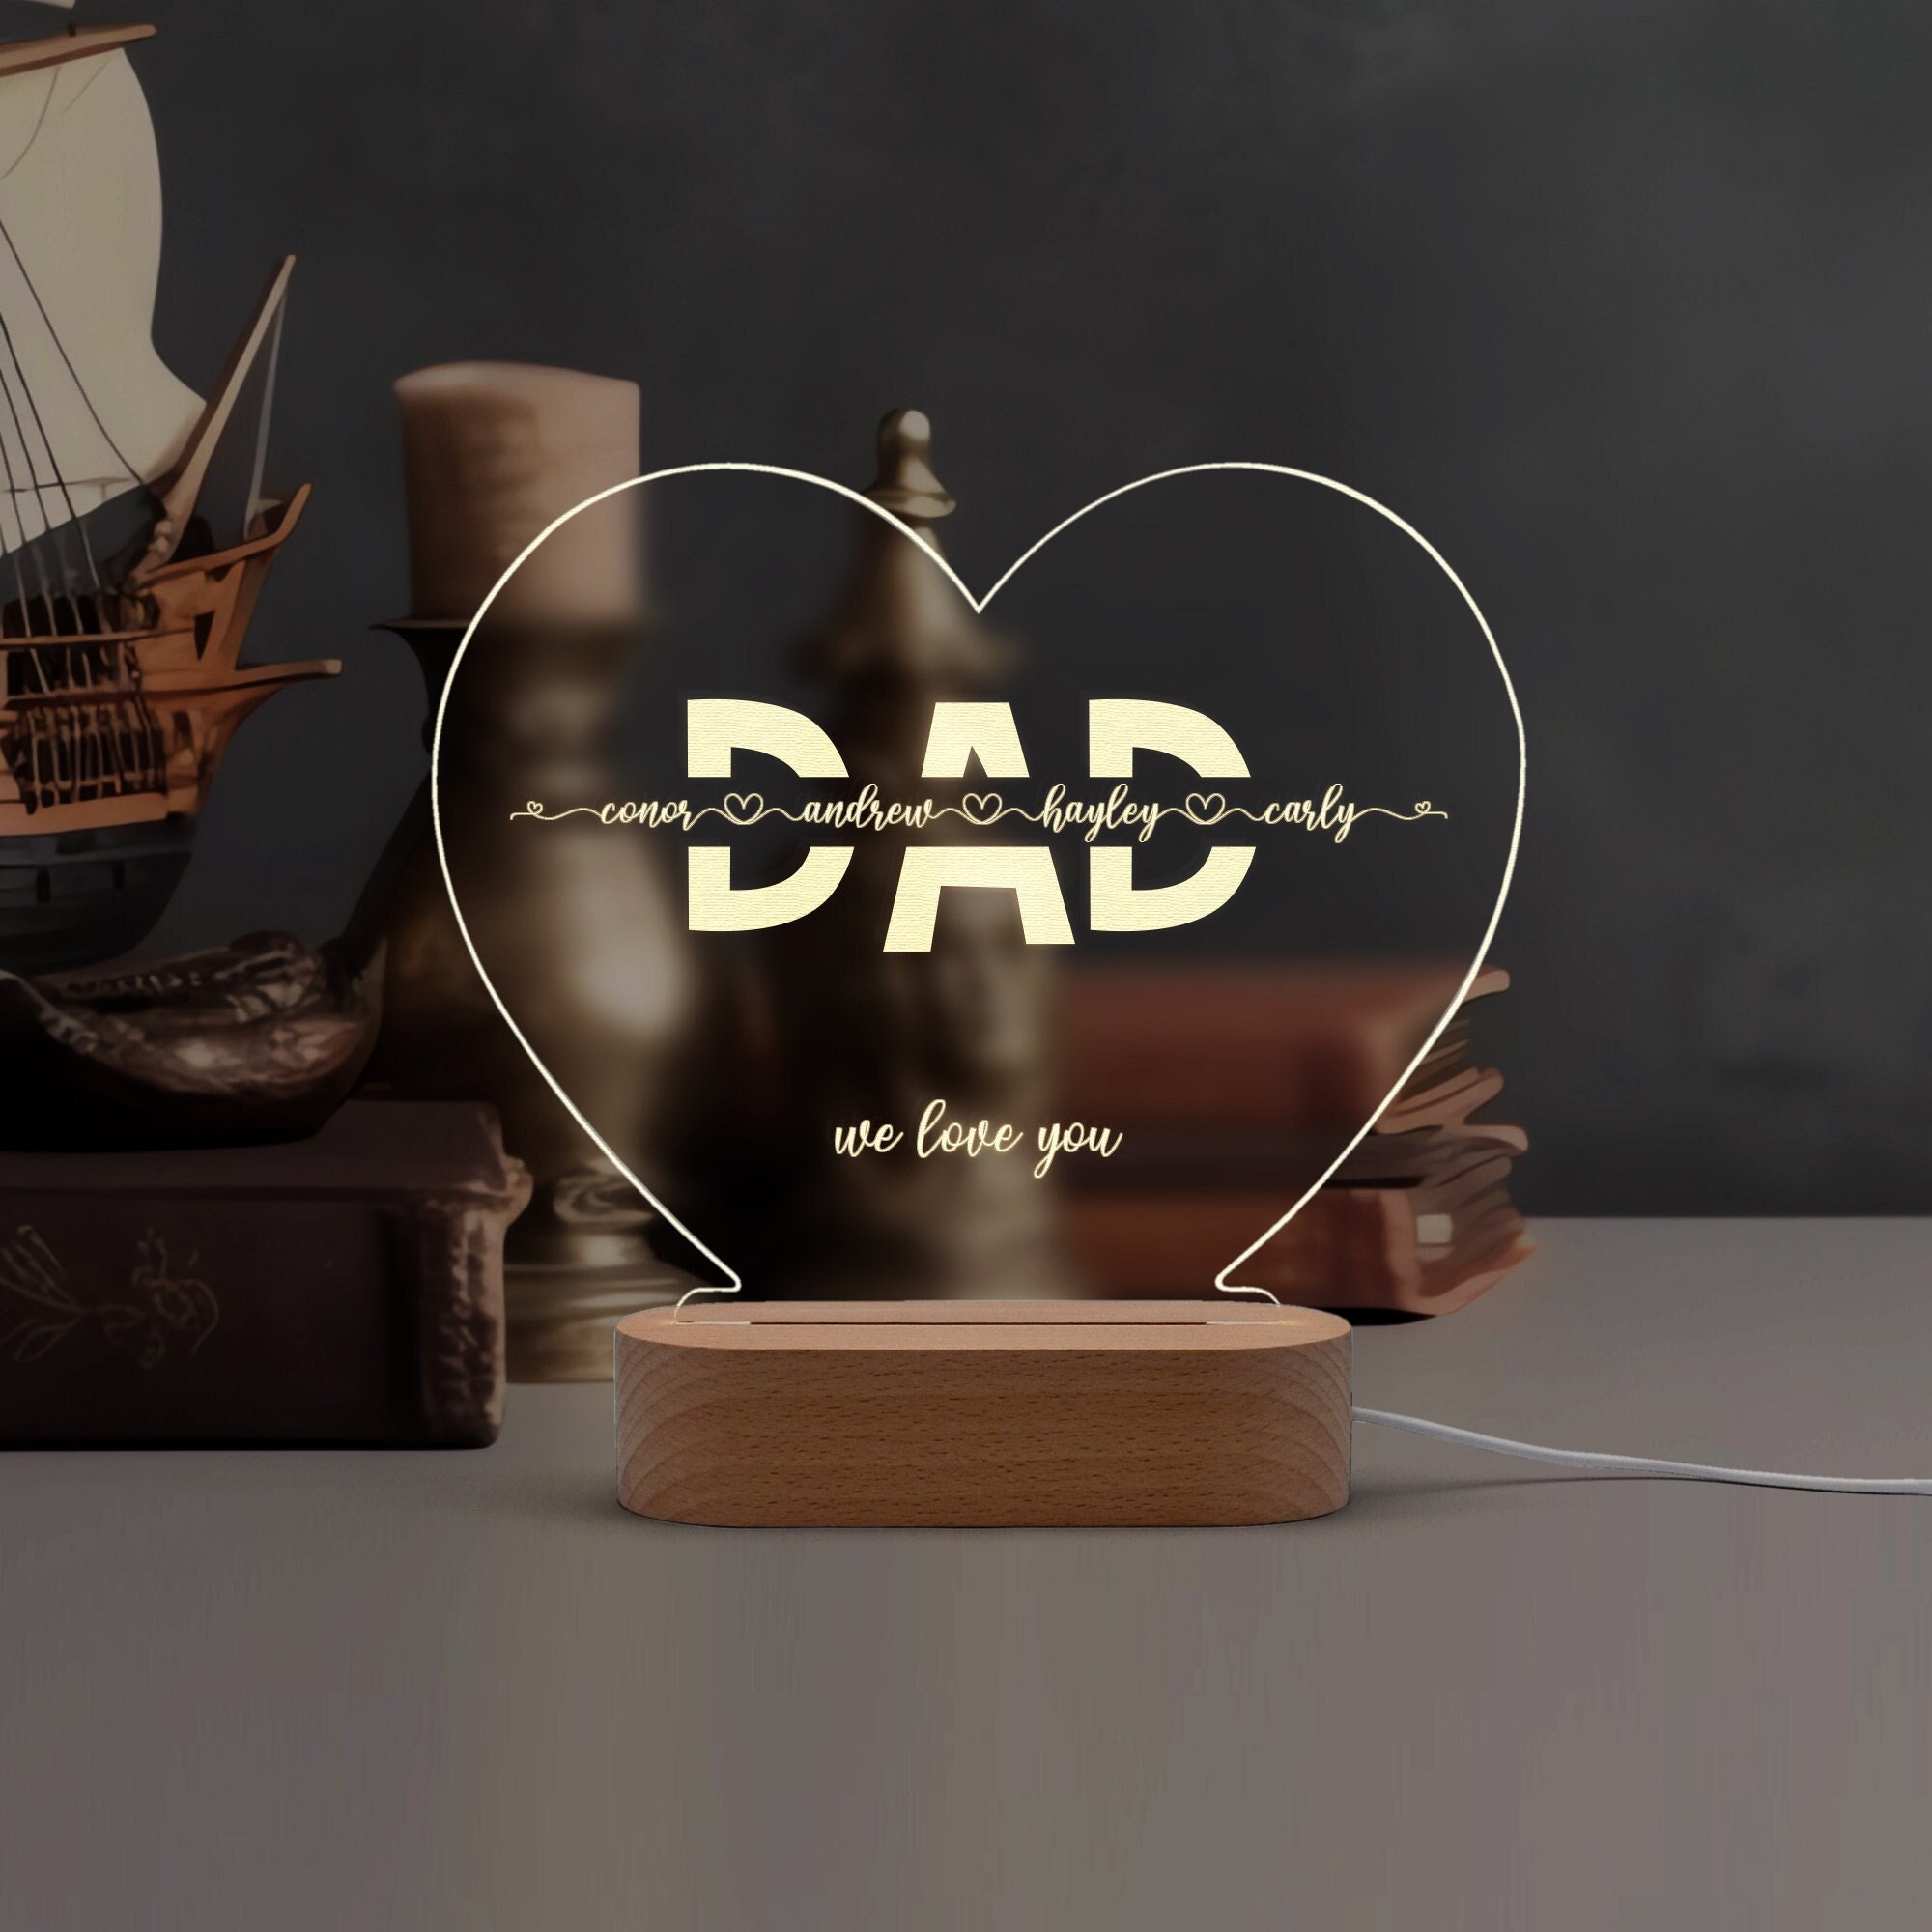 wowcugi Customized Acrylic Dad Night Light - to My Dad - Night Lamp Gifts  for Father's Day Birthday Christmas - Gifts from Daughter to Dad 